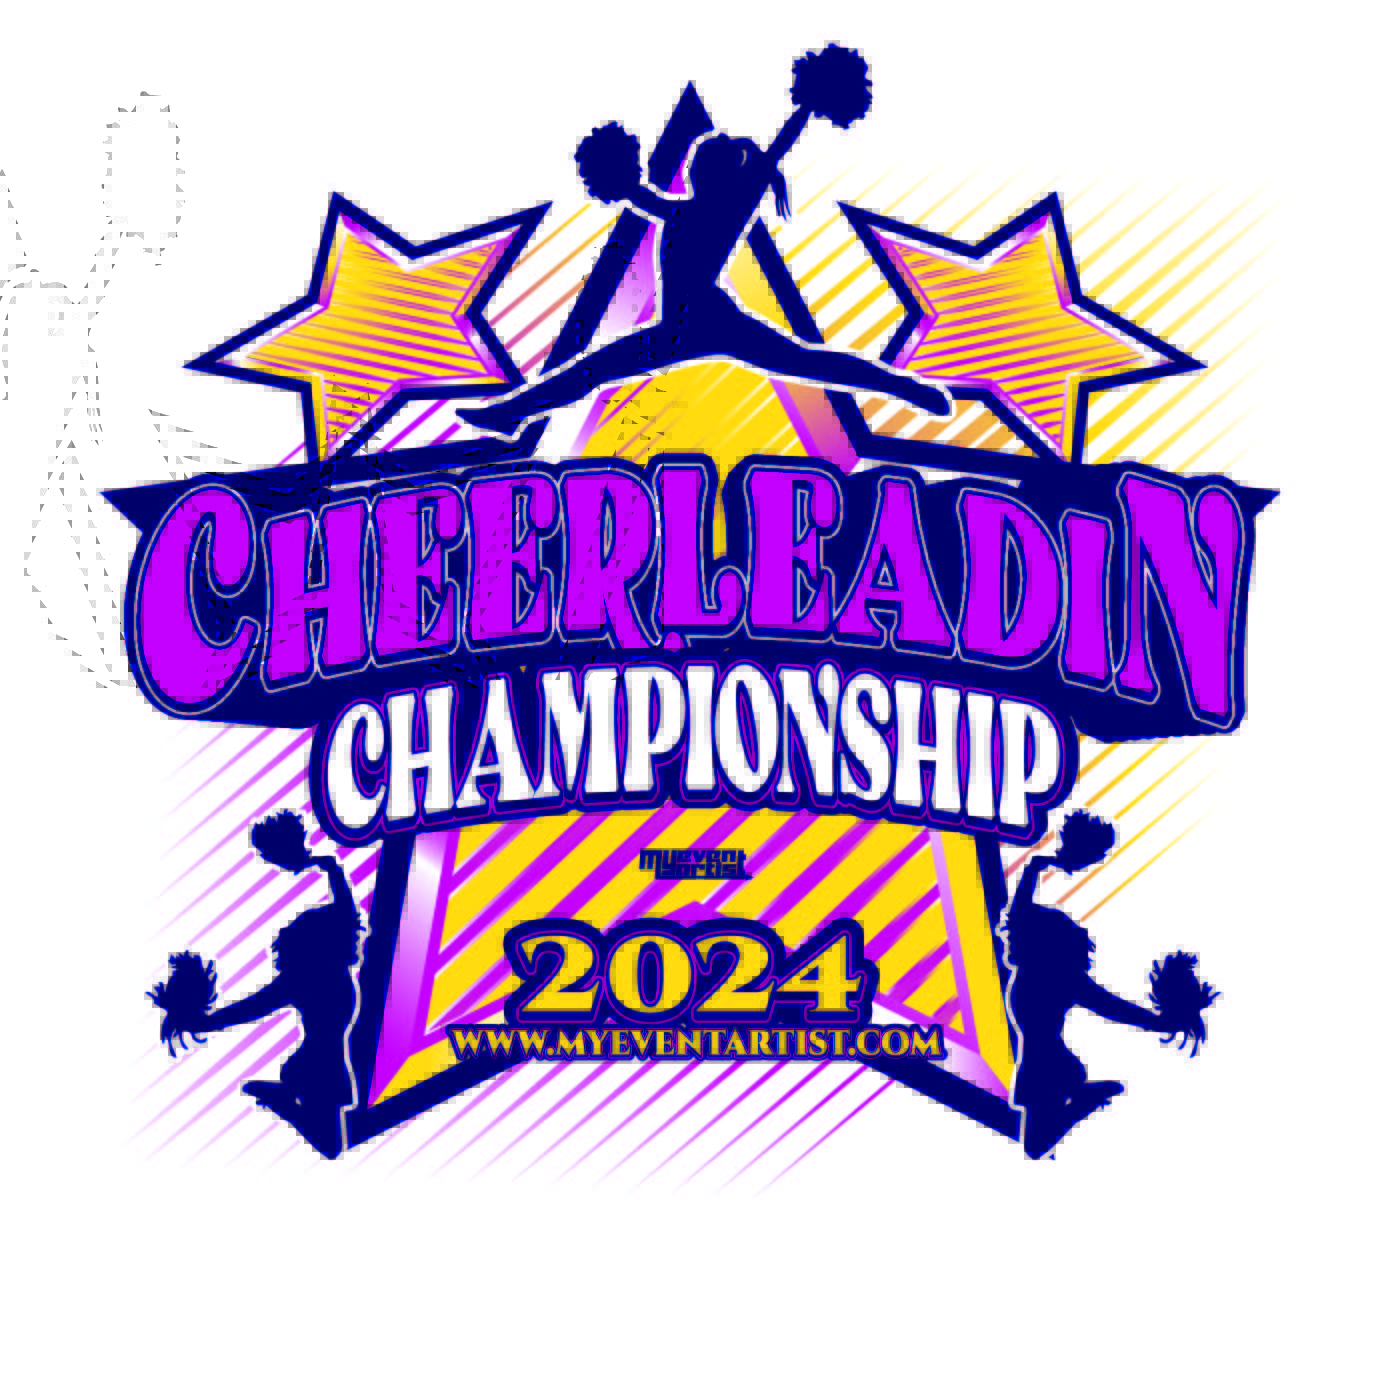 CHEER EVENT CHAMPIONSHIP VECTOR LOGO DESIGN READY FOR PRINT | My Event ...